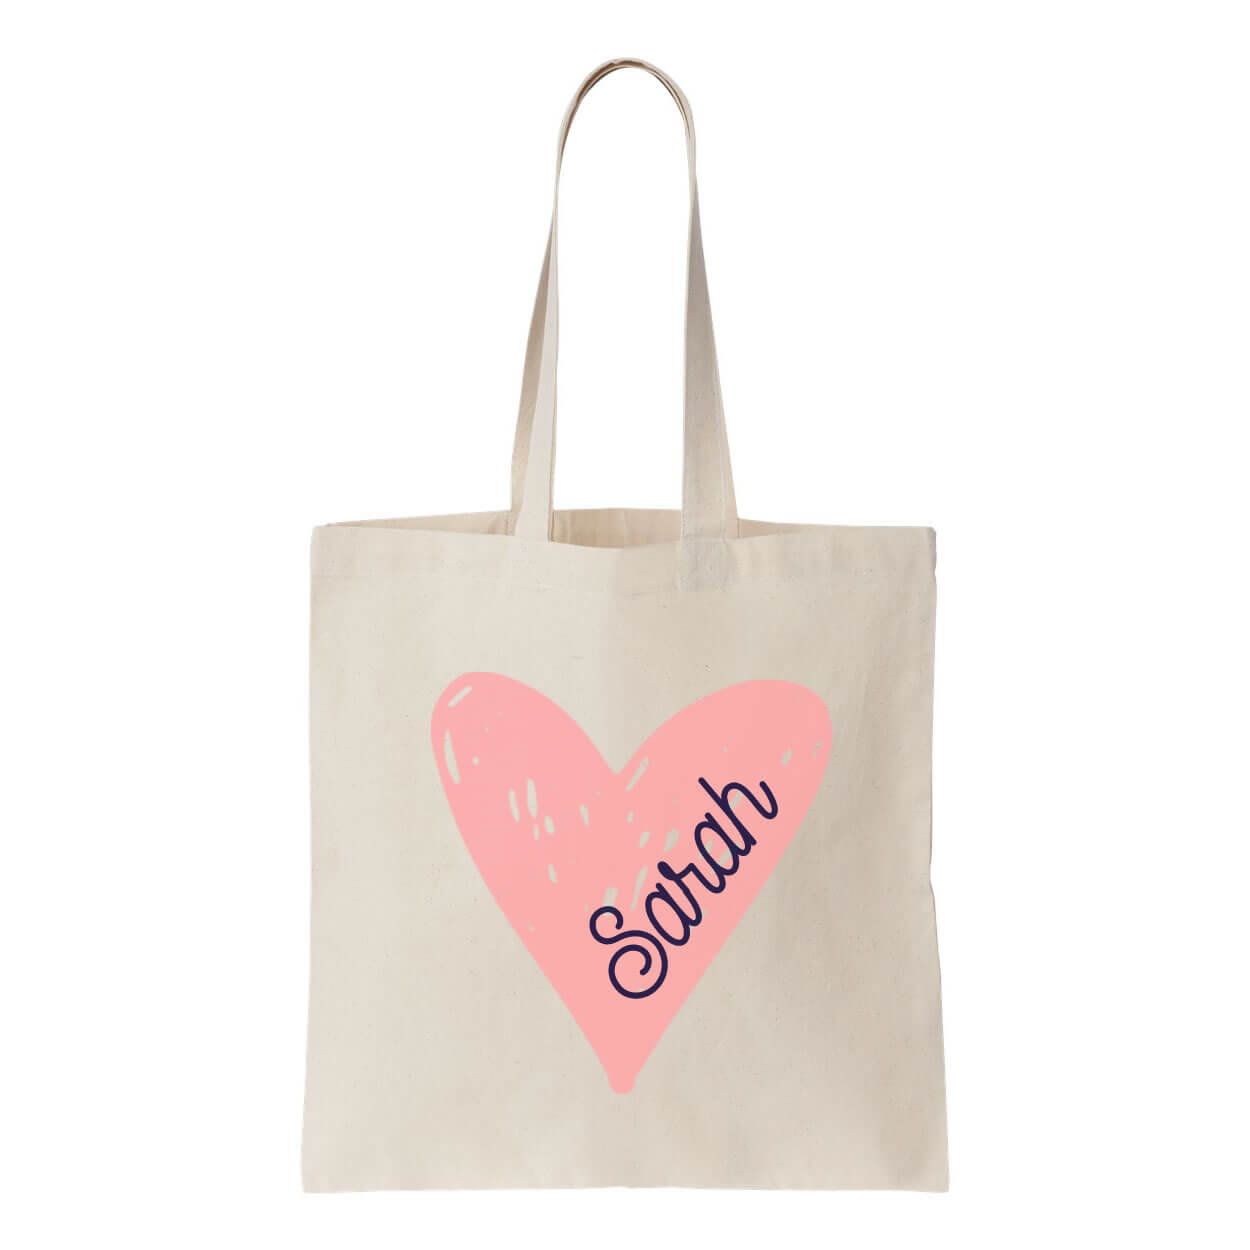 Her Name Statement Small Canvas Tote Bag